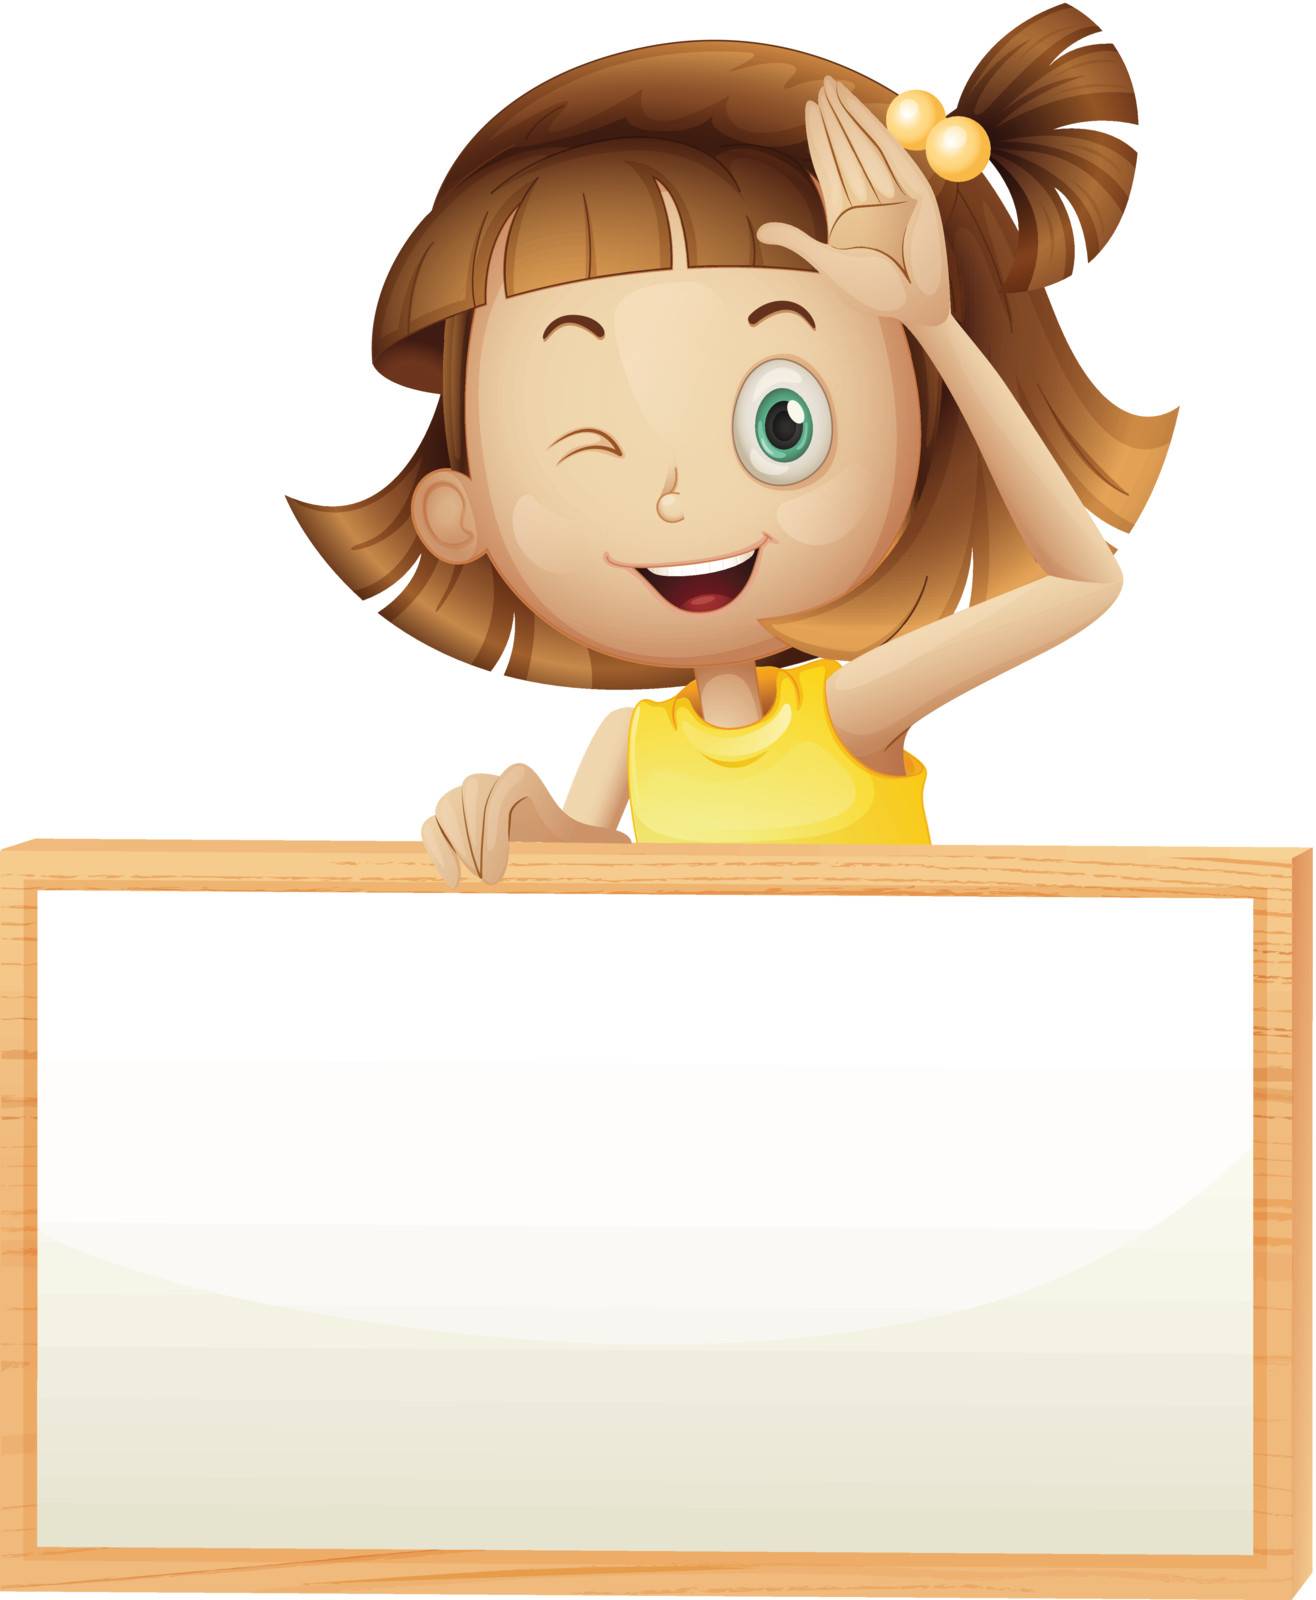 Illustration of a girl blinking her eye holding an empty board on a white background